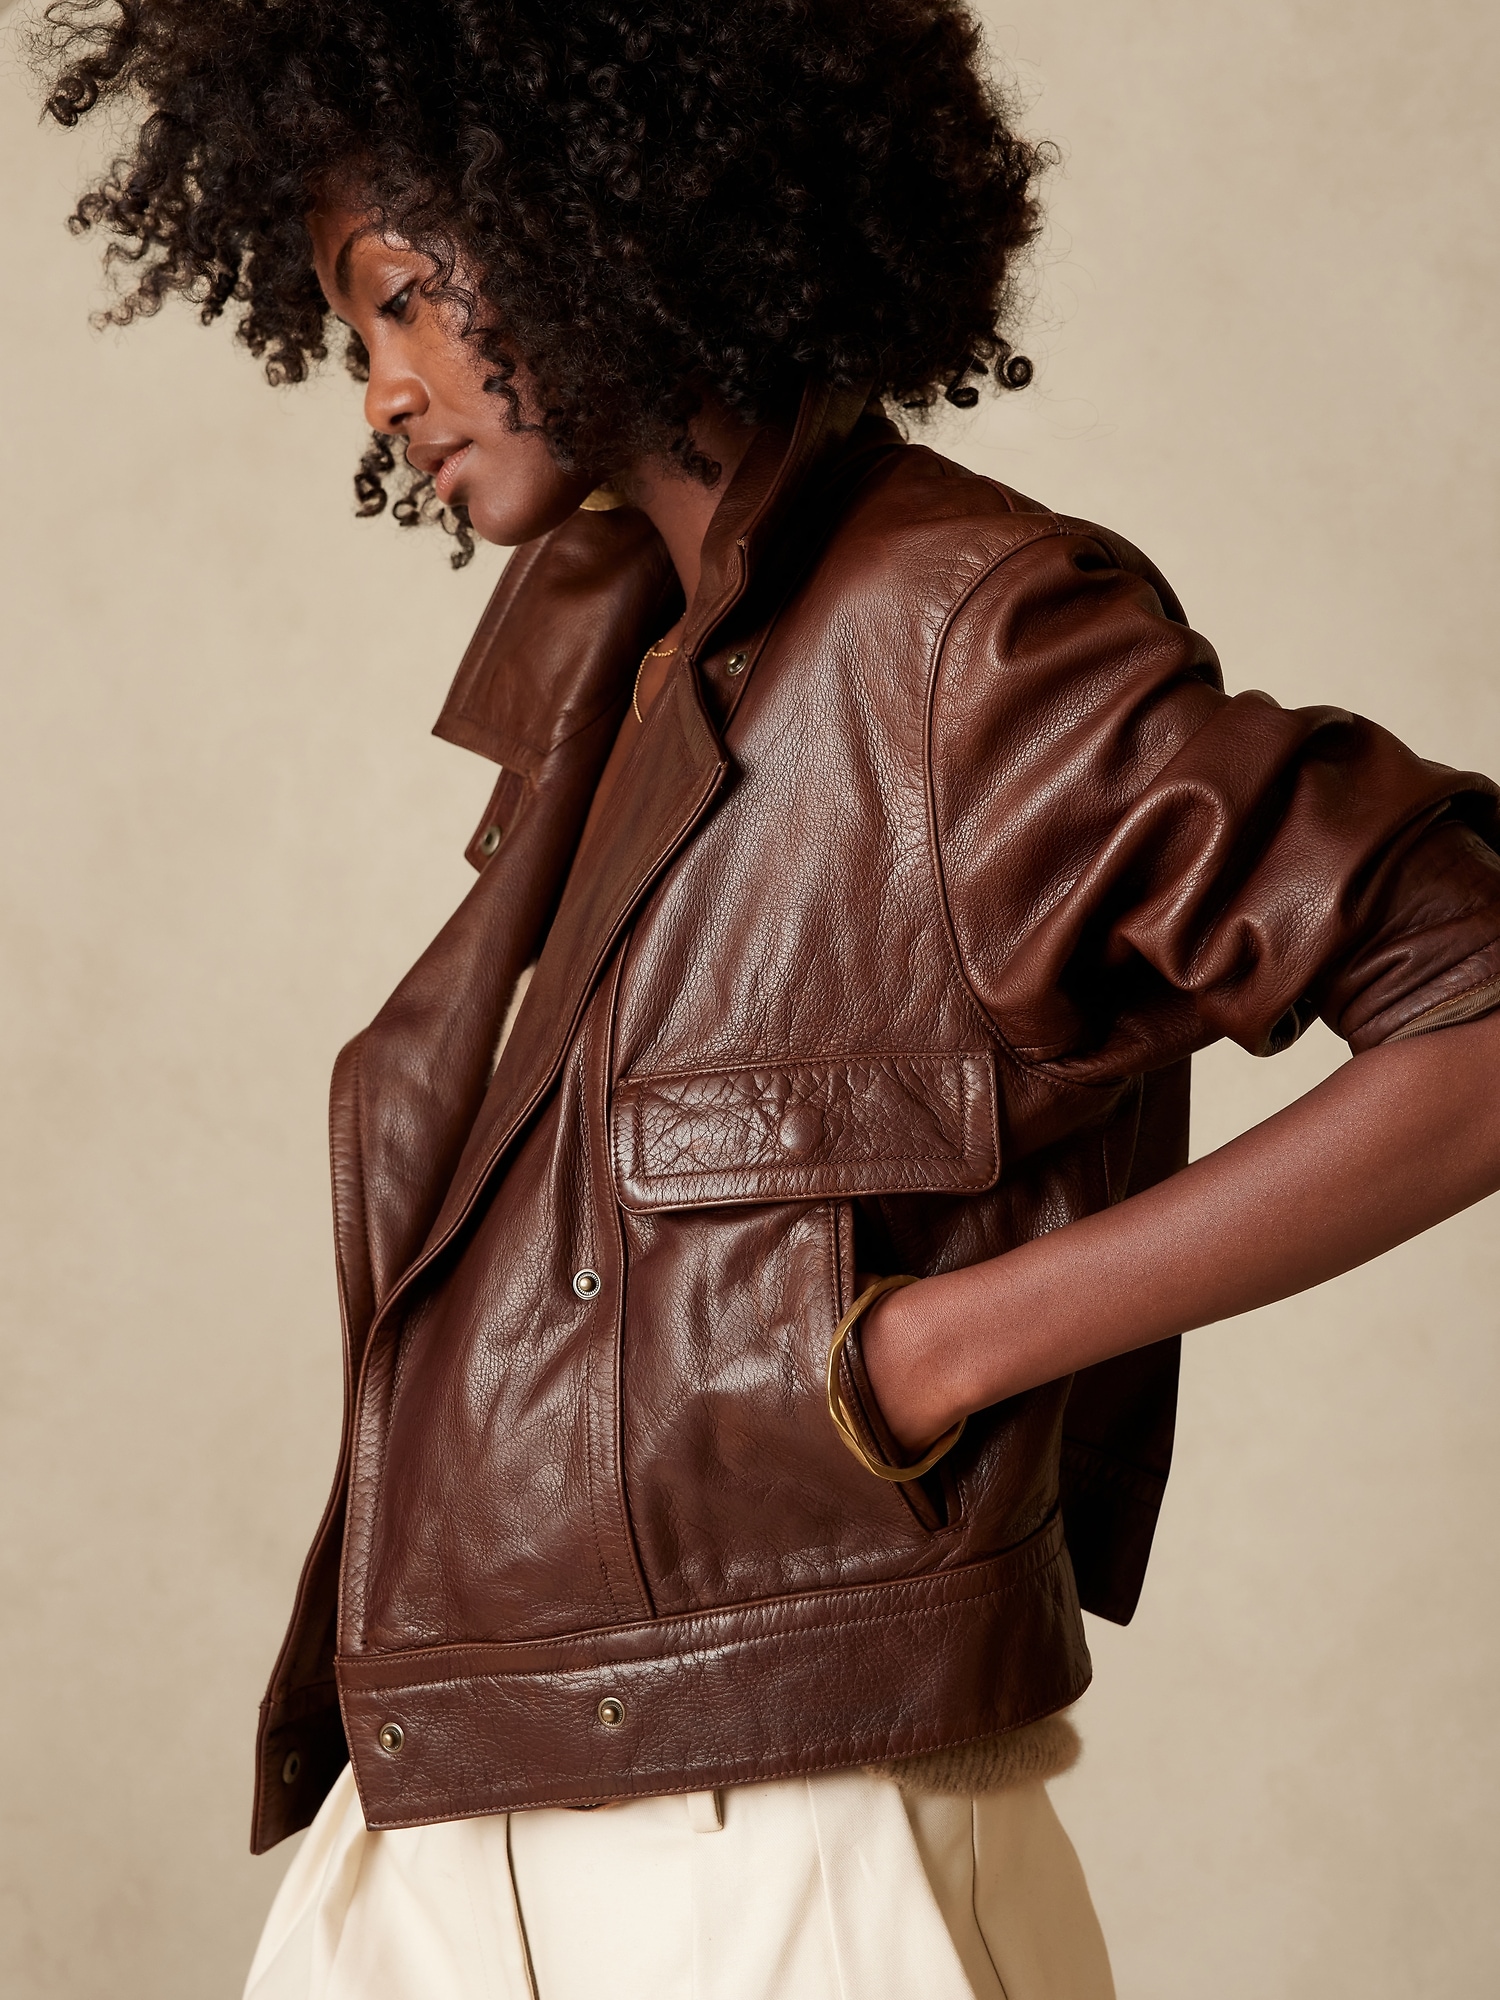 5 Leather Jacket Styles That Are Timeless